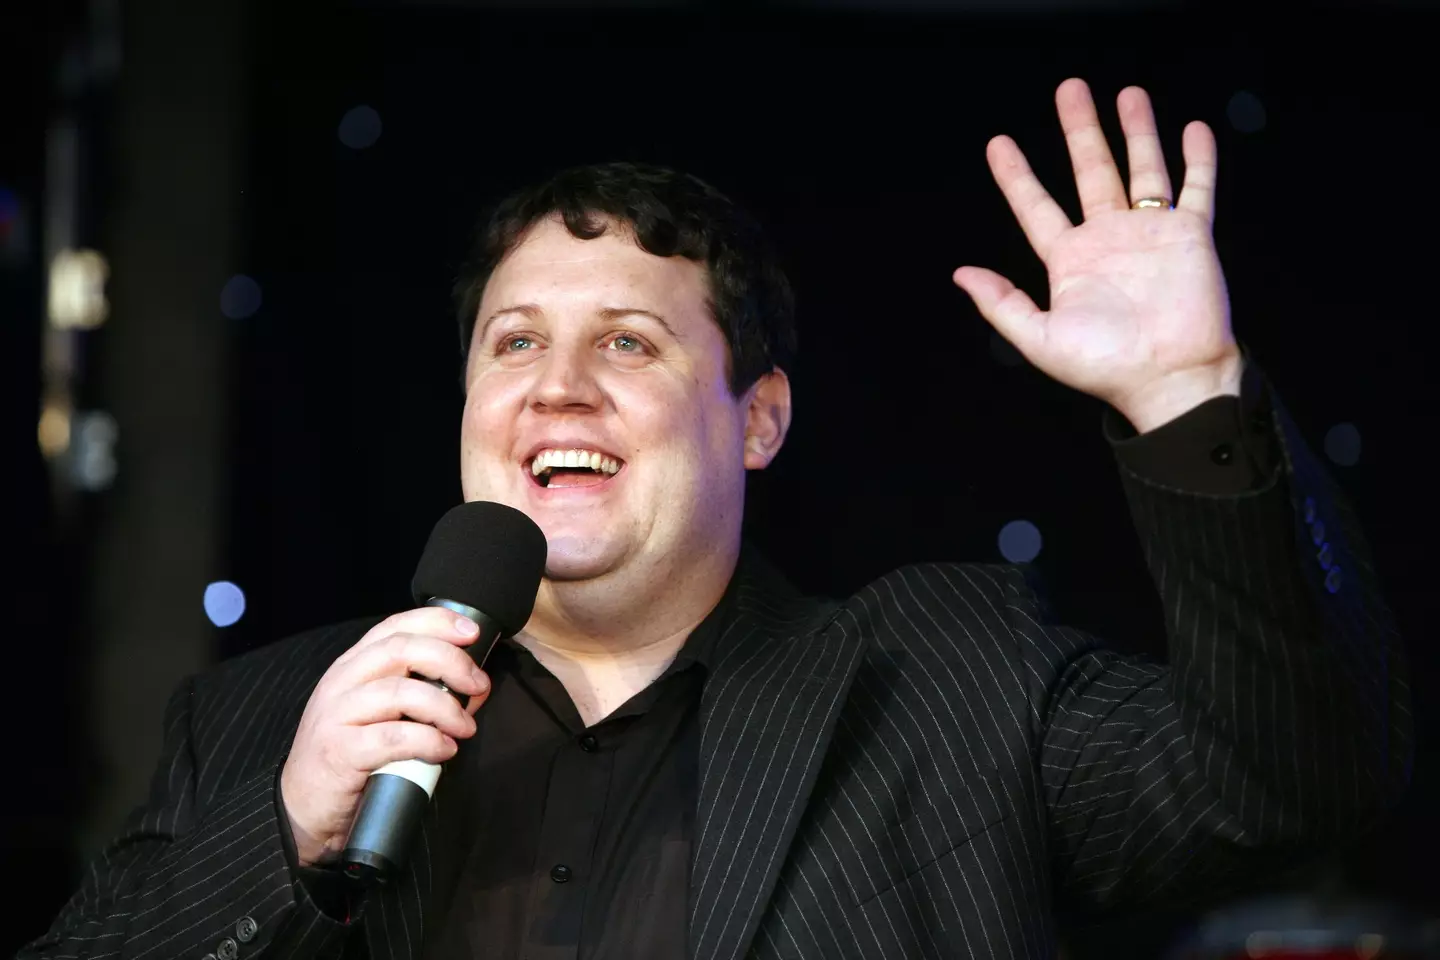 Peter Kay has returned to the stage after 12 years.